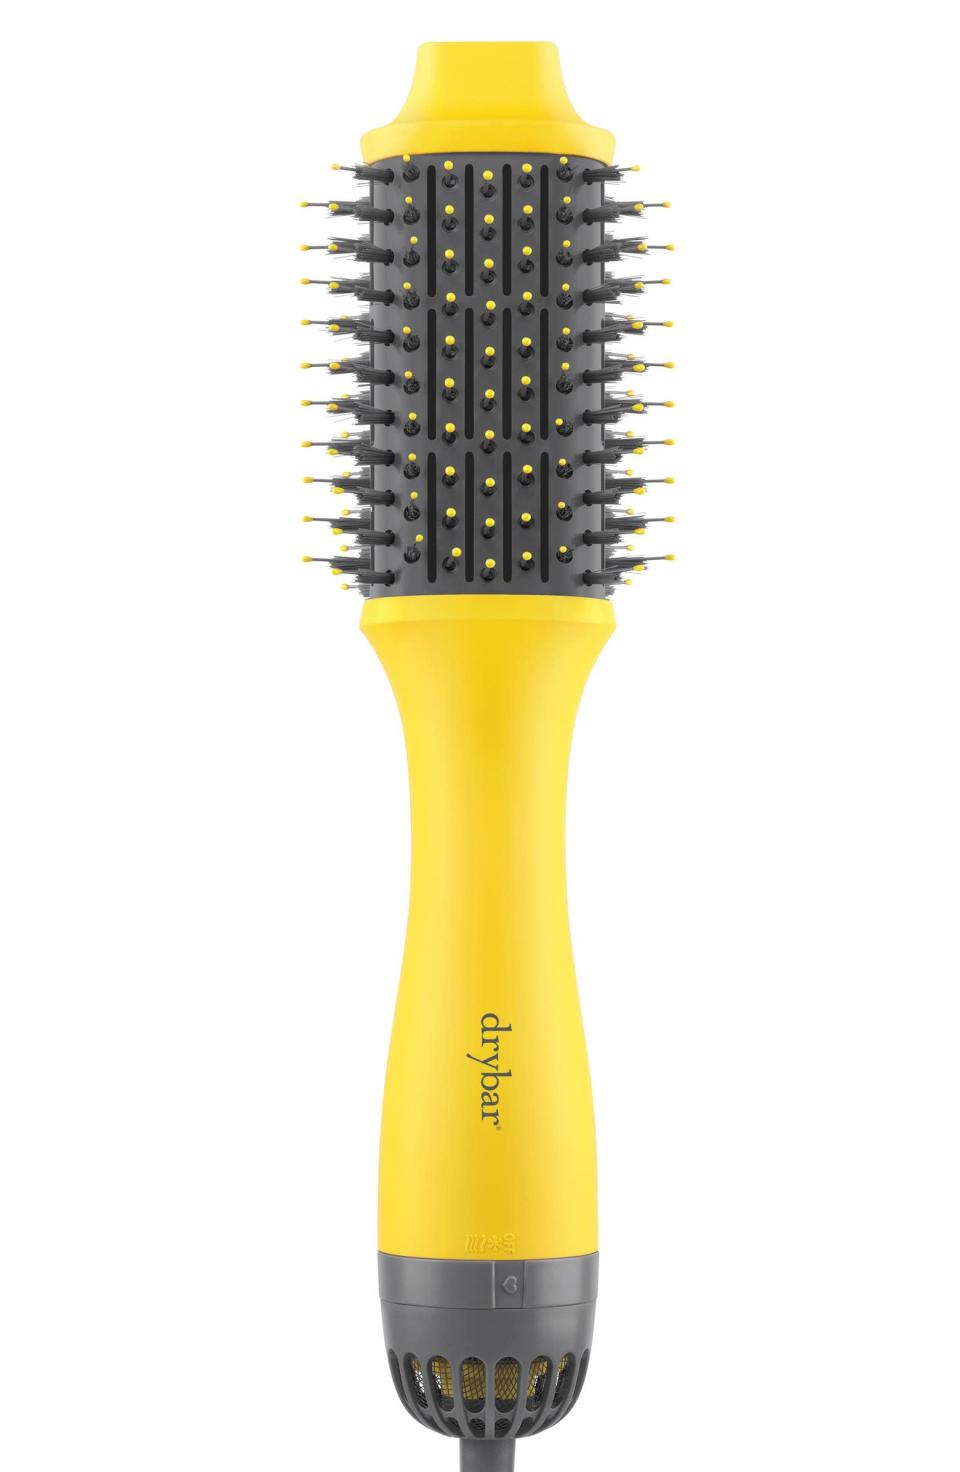 <h2>15% Off Drybar The Double Shot Round Blow-Dryer Brush</h2><br>Remember when blow-dryer brushes were all the rage? Well, they're not going anywhere any time soon. Super convenient and easy, gift this Drybar essential to anyone on your list who's a hair-obsessed busybody. <br><br><em>Shop <strong><a href="https://www.nordstrom.com/browse/sale/beauty/hair?breadcrumb=Home%2FSale%2FBeauty%2FHair%20Care" rel="nofollow noopener" target="_blank" data-ylk="slk:Haircare On Sale" class="link ">Haircare On Sale</a></strong></em><br><br><strong>DryBar</strong> The Double Shot Round Blow-Dryer Brush, $, available at <a href="https://go.skimresources.com/?id=30283X879131&url=https%3A%2F%2Fwww.nordstrom.com%2Fs%2Fdrybar-the-double-shot-round-blow-dryer-brush%2F5467553" rel="nofollow noopener" target="_blank" data-ylk="slk:Nordstrom" class="link ">Nordstrom</a>